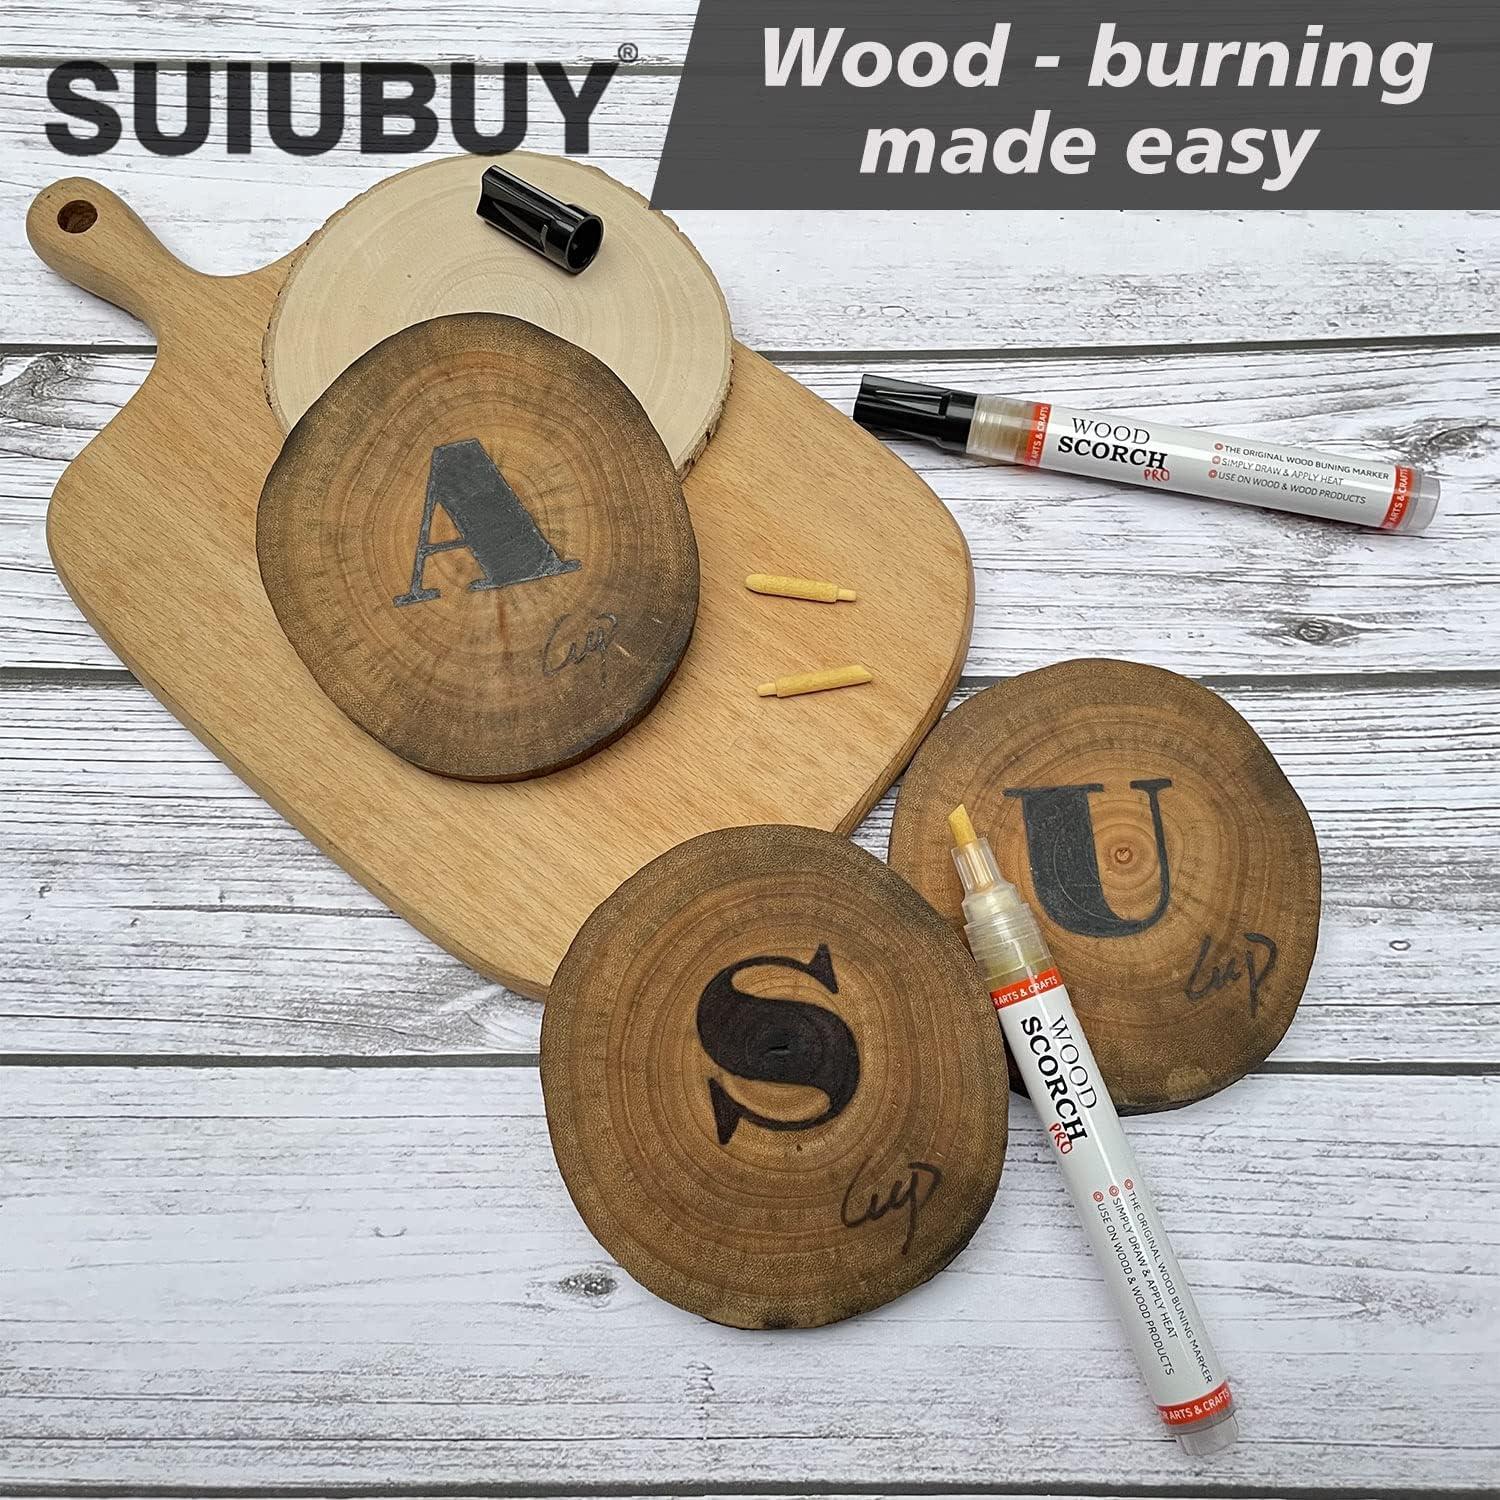 Testing Best Woods for Chemical Wood Burning — DIY Project Tutorials